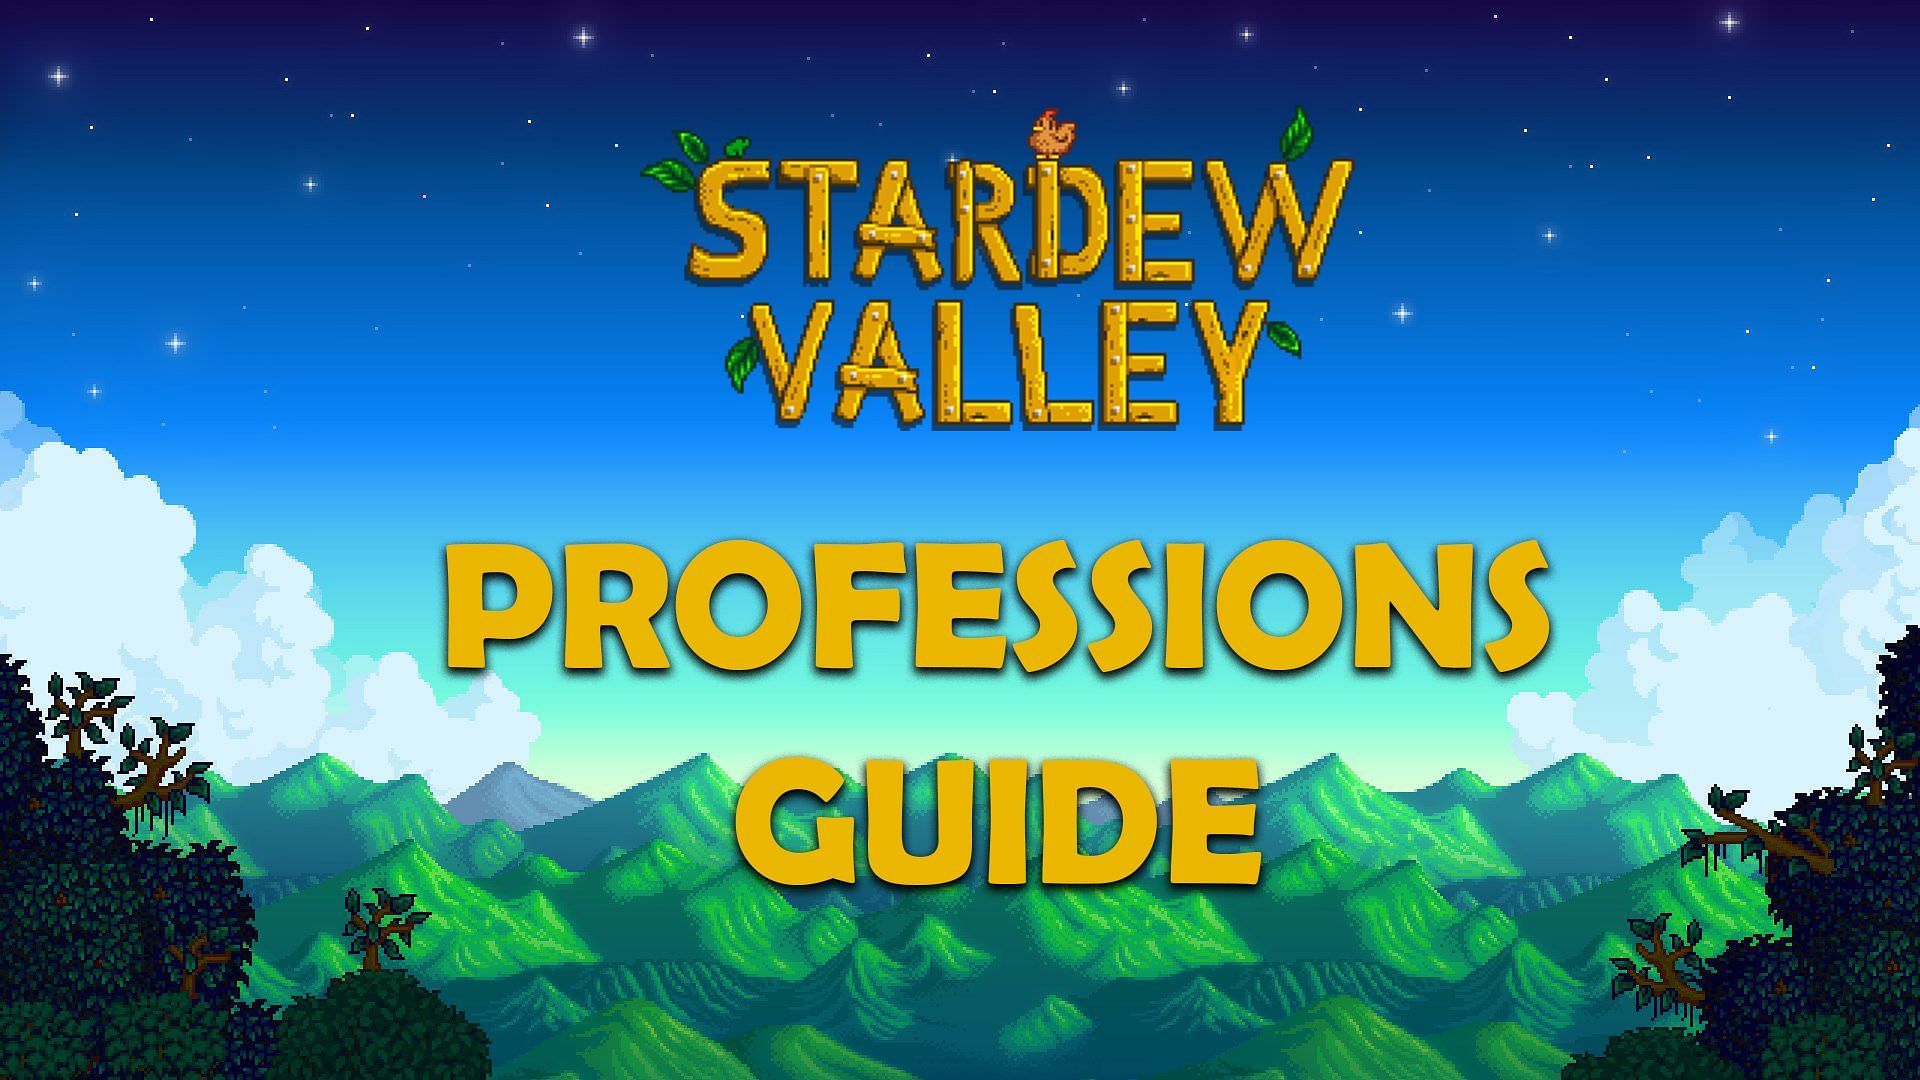 The professional choices in Stardew Valley add an interesting dynamic to the game.